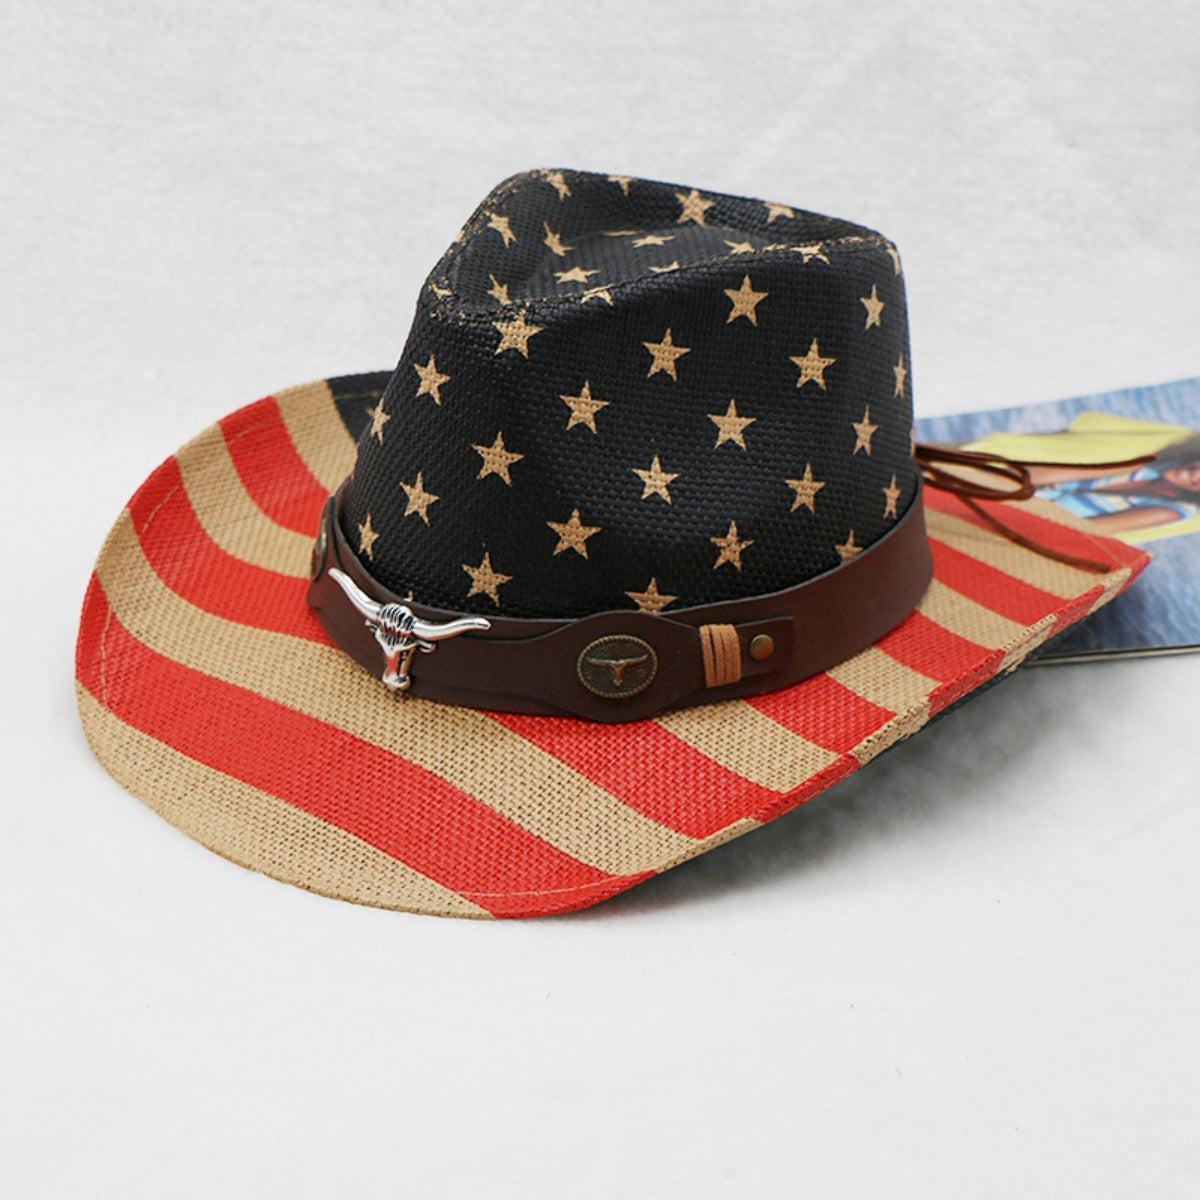 a hat with a leather band and stars on it